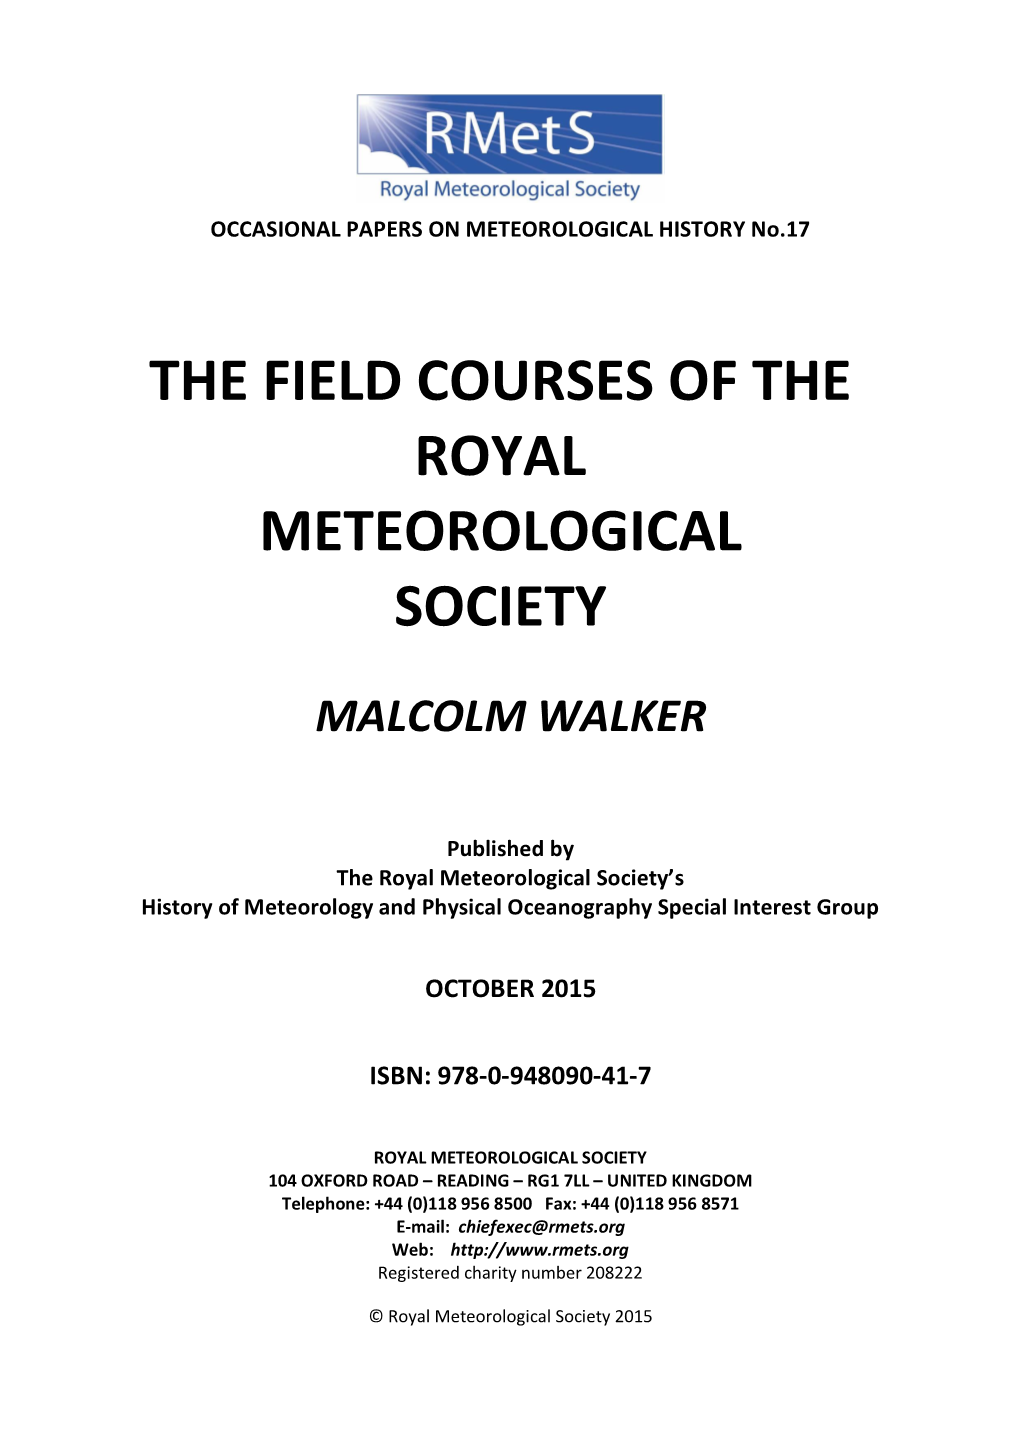 The Field Courses of the Royal Meteorological Society